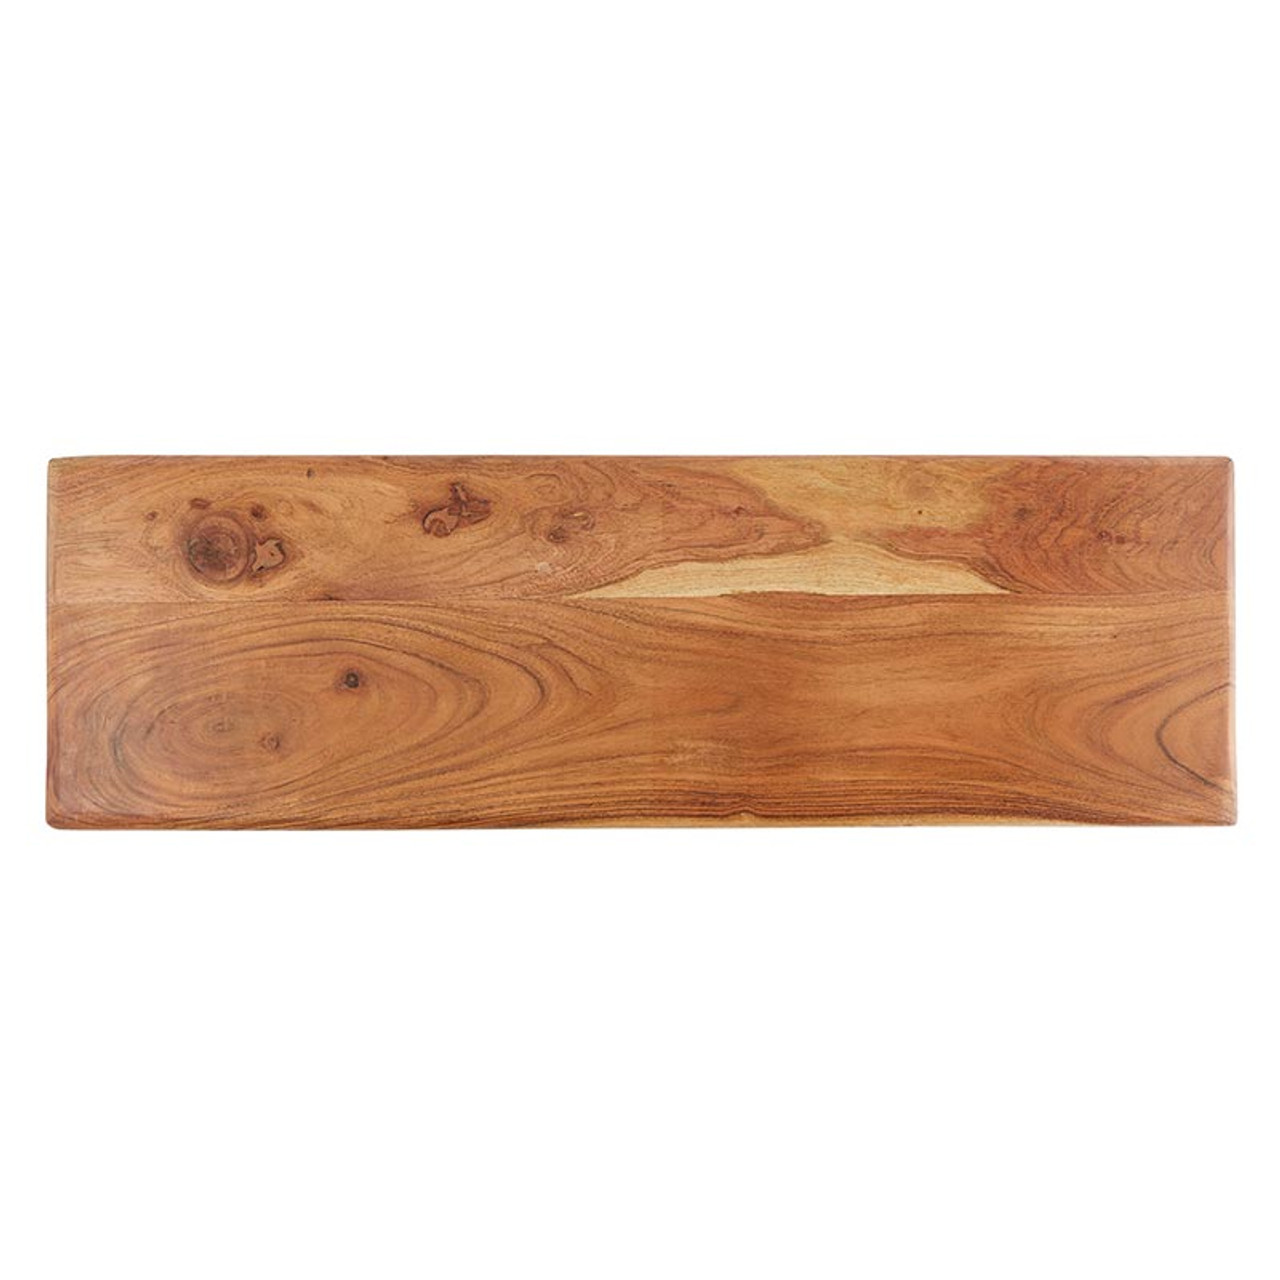 Plank Board with Feet - Natural